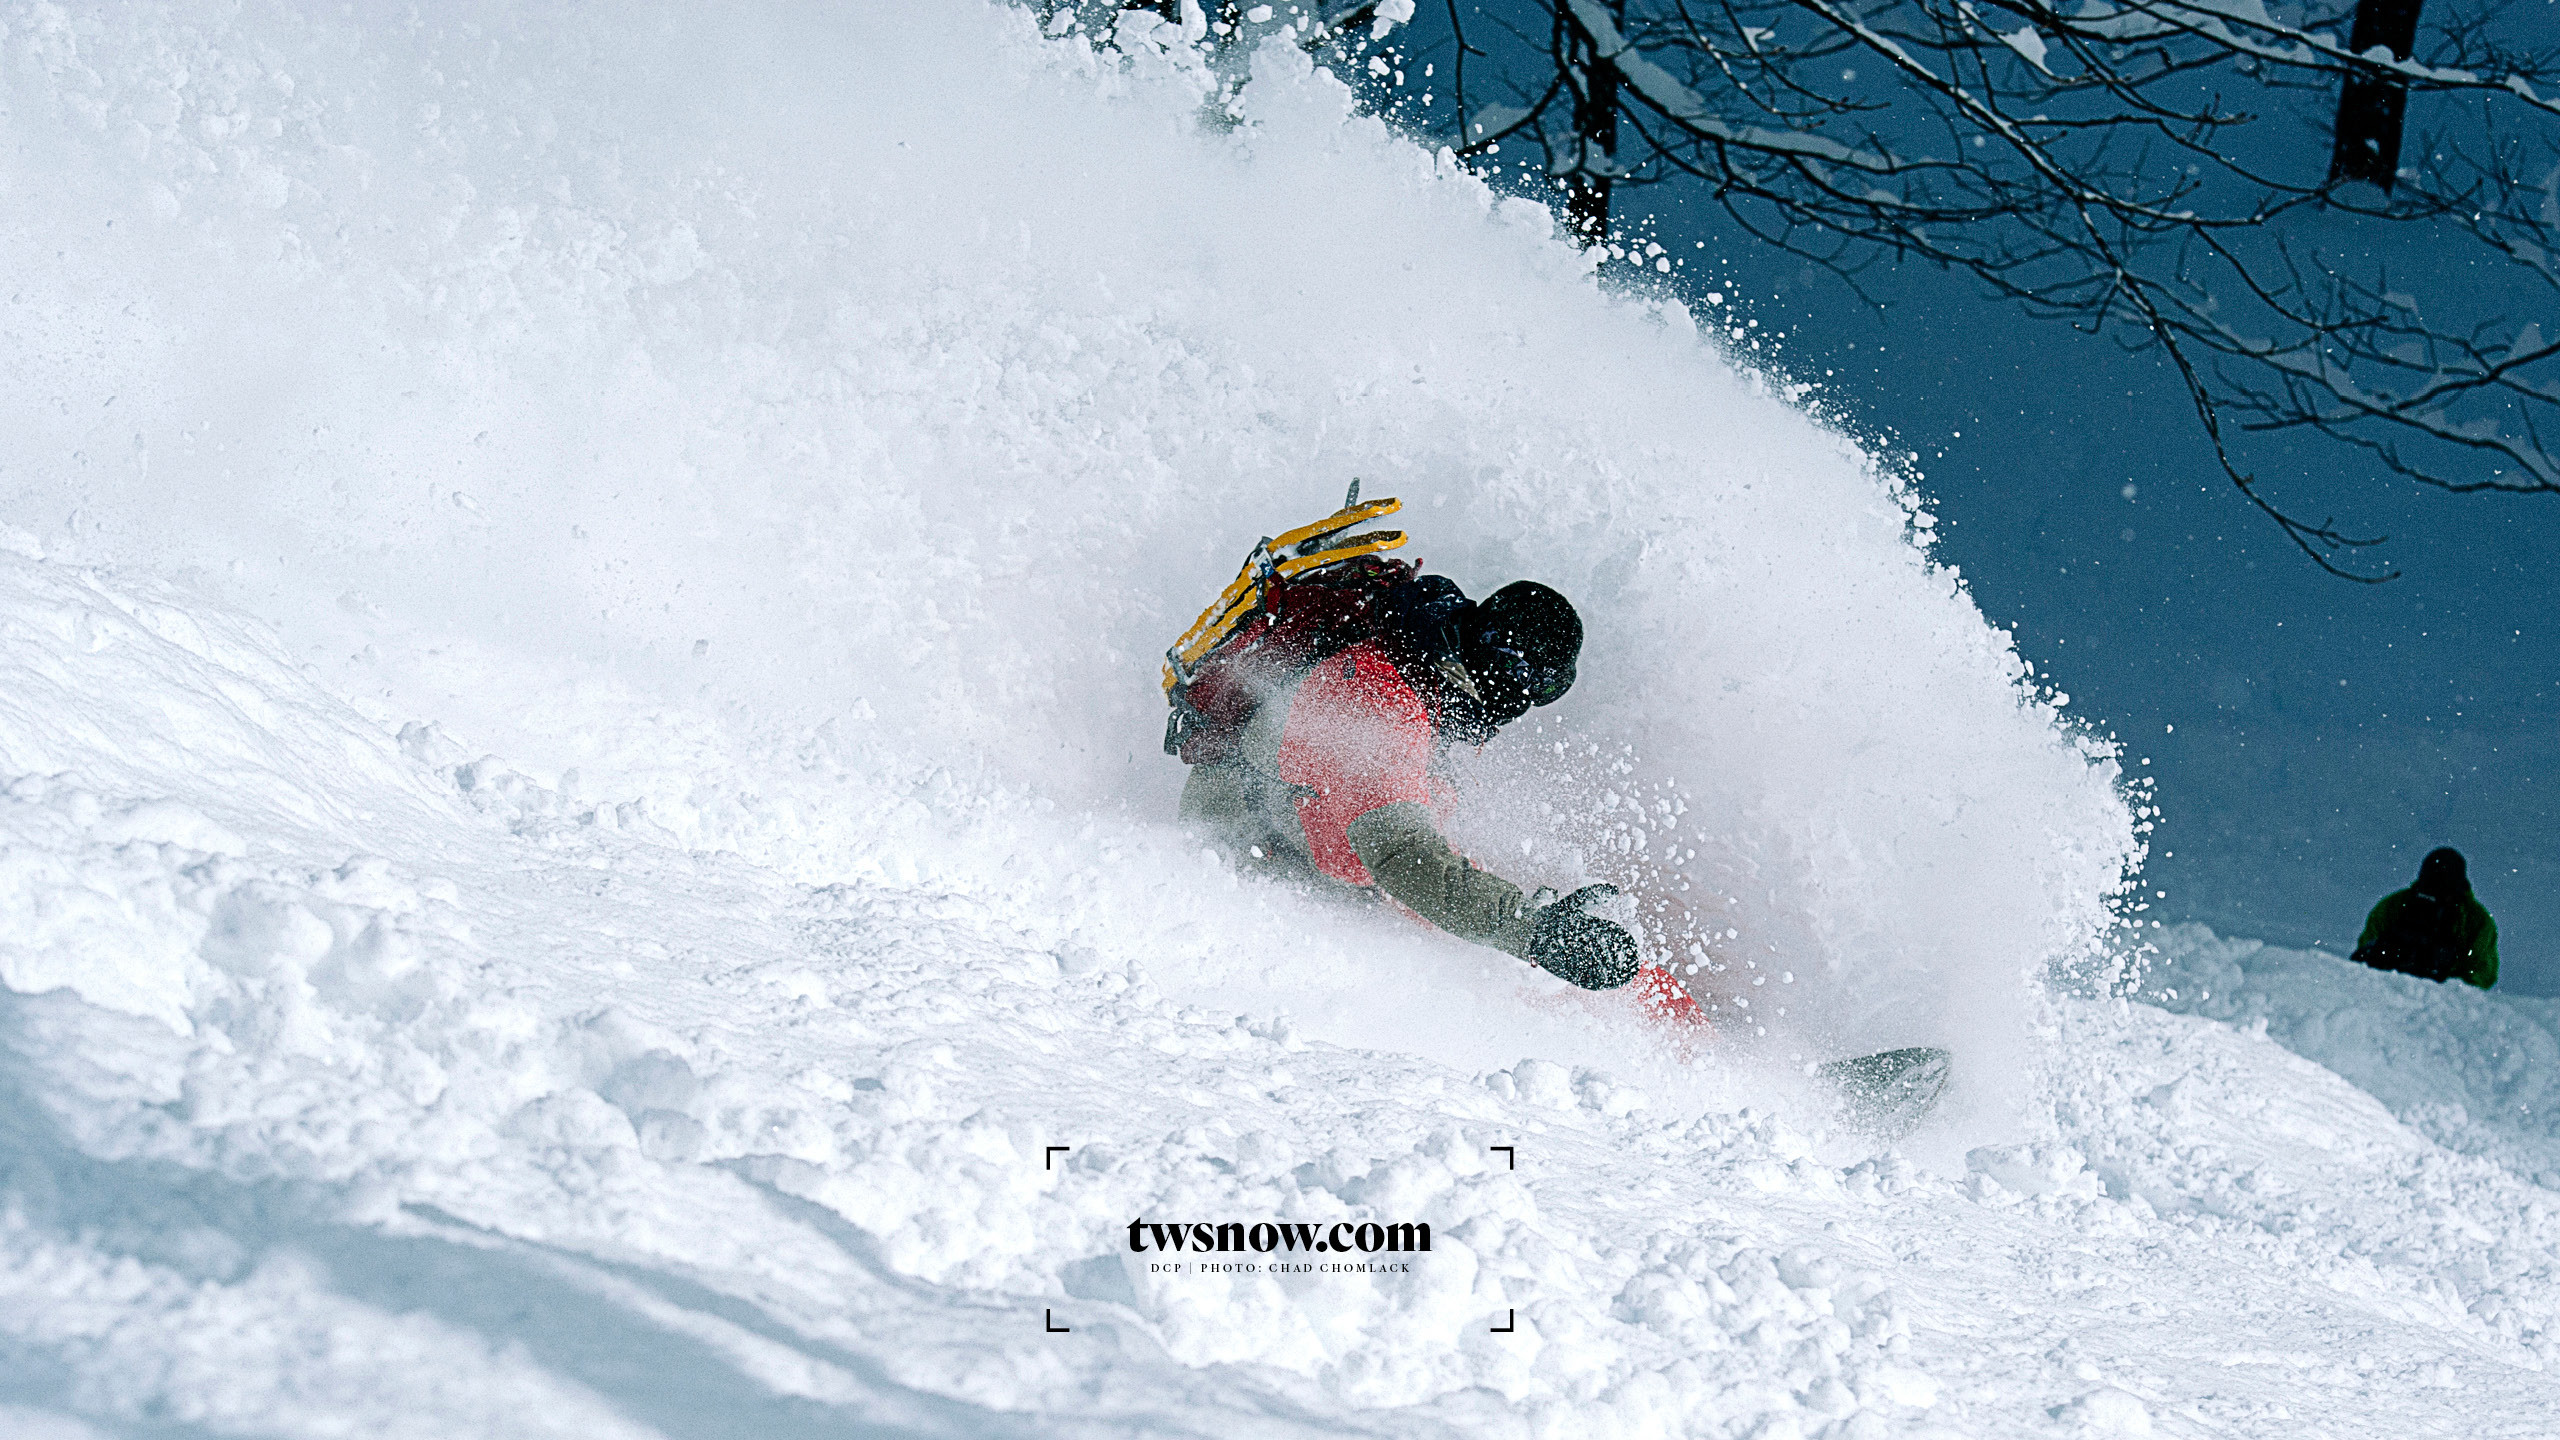 2560x1440 DCP doing what he does best with Japan pow! Photo: Chad Chomlack